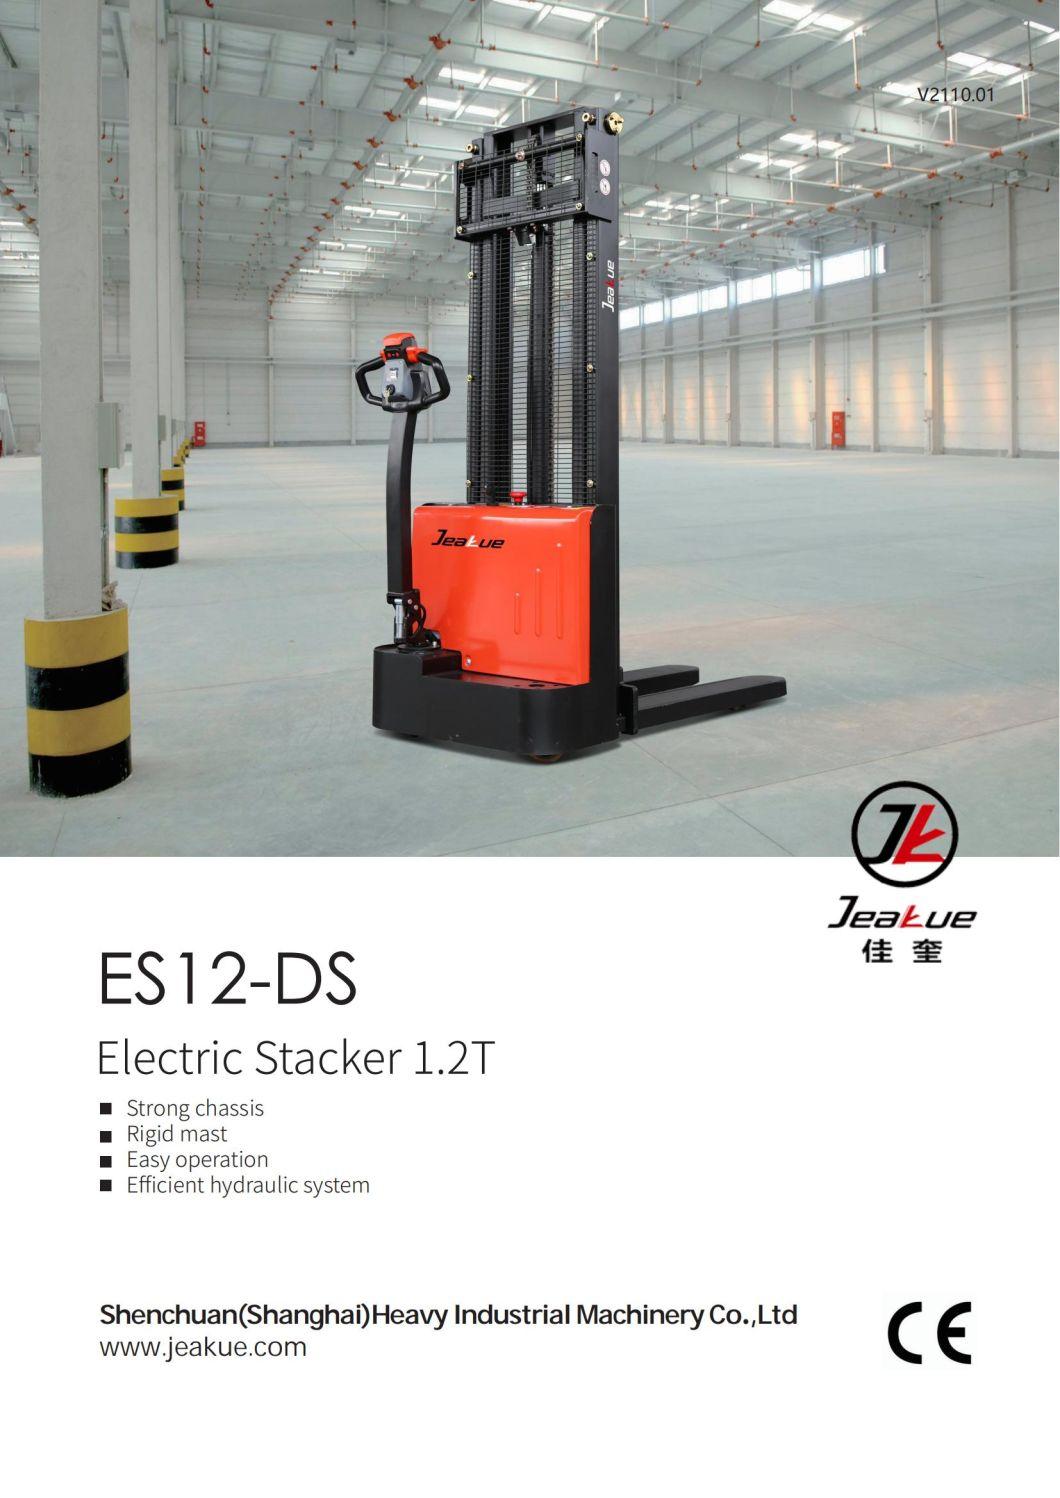 High-Strength Cheap Hot Price Walkie Type Full Electric Pallet Stacker